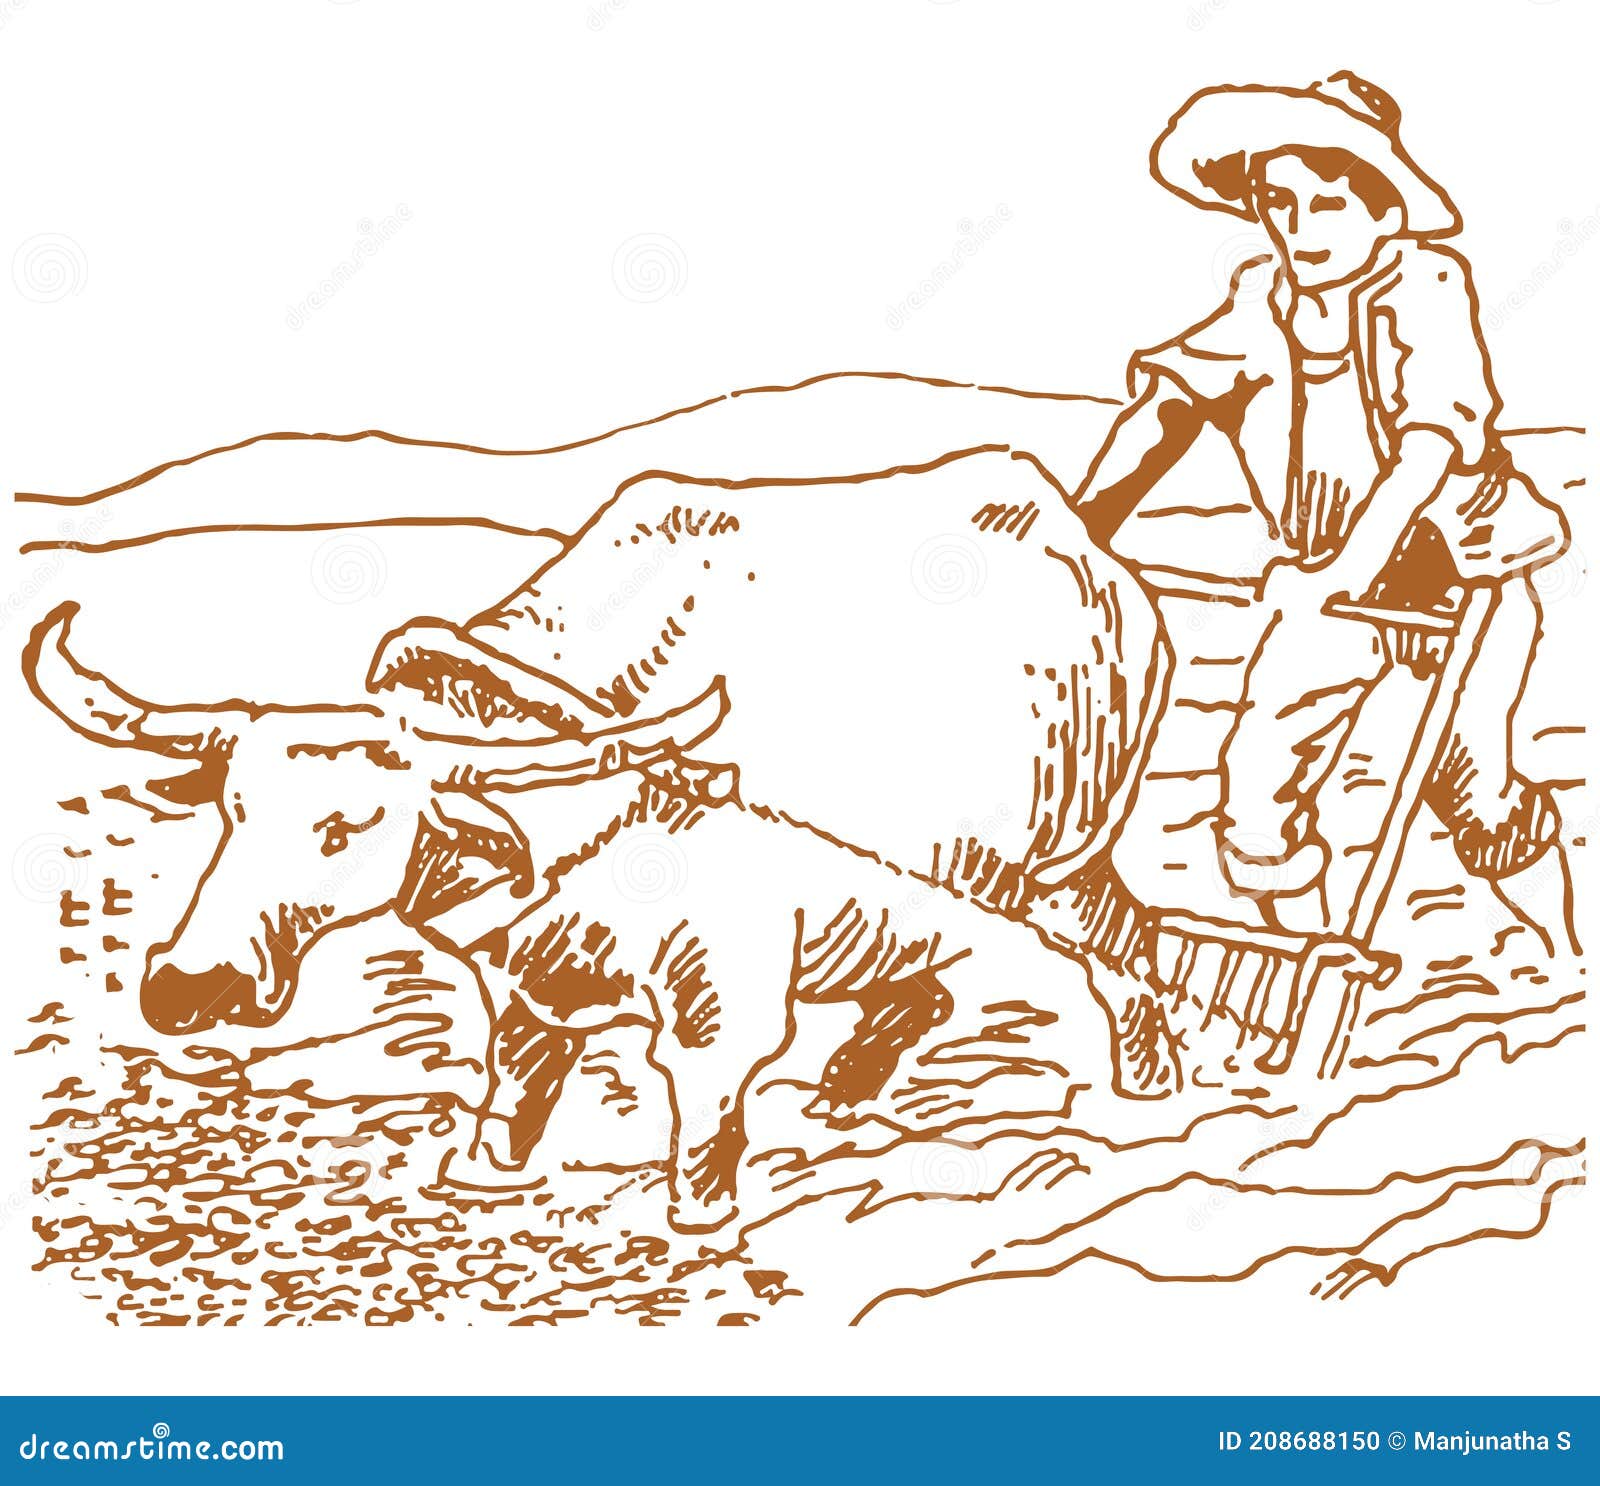 1474 Indian Farmer Drawing Images Stock Photos  Vectors  Shutterstock